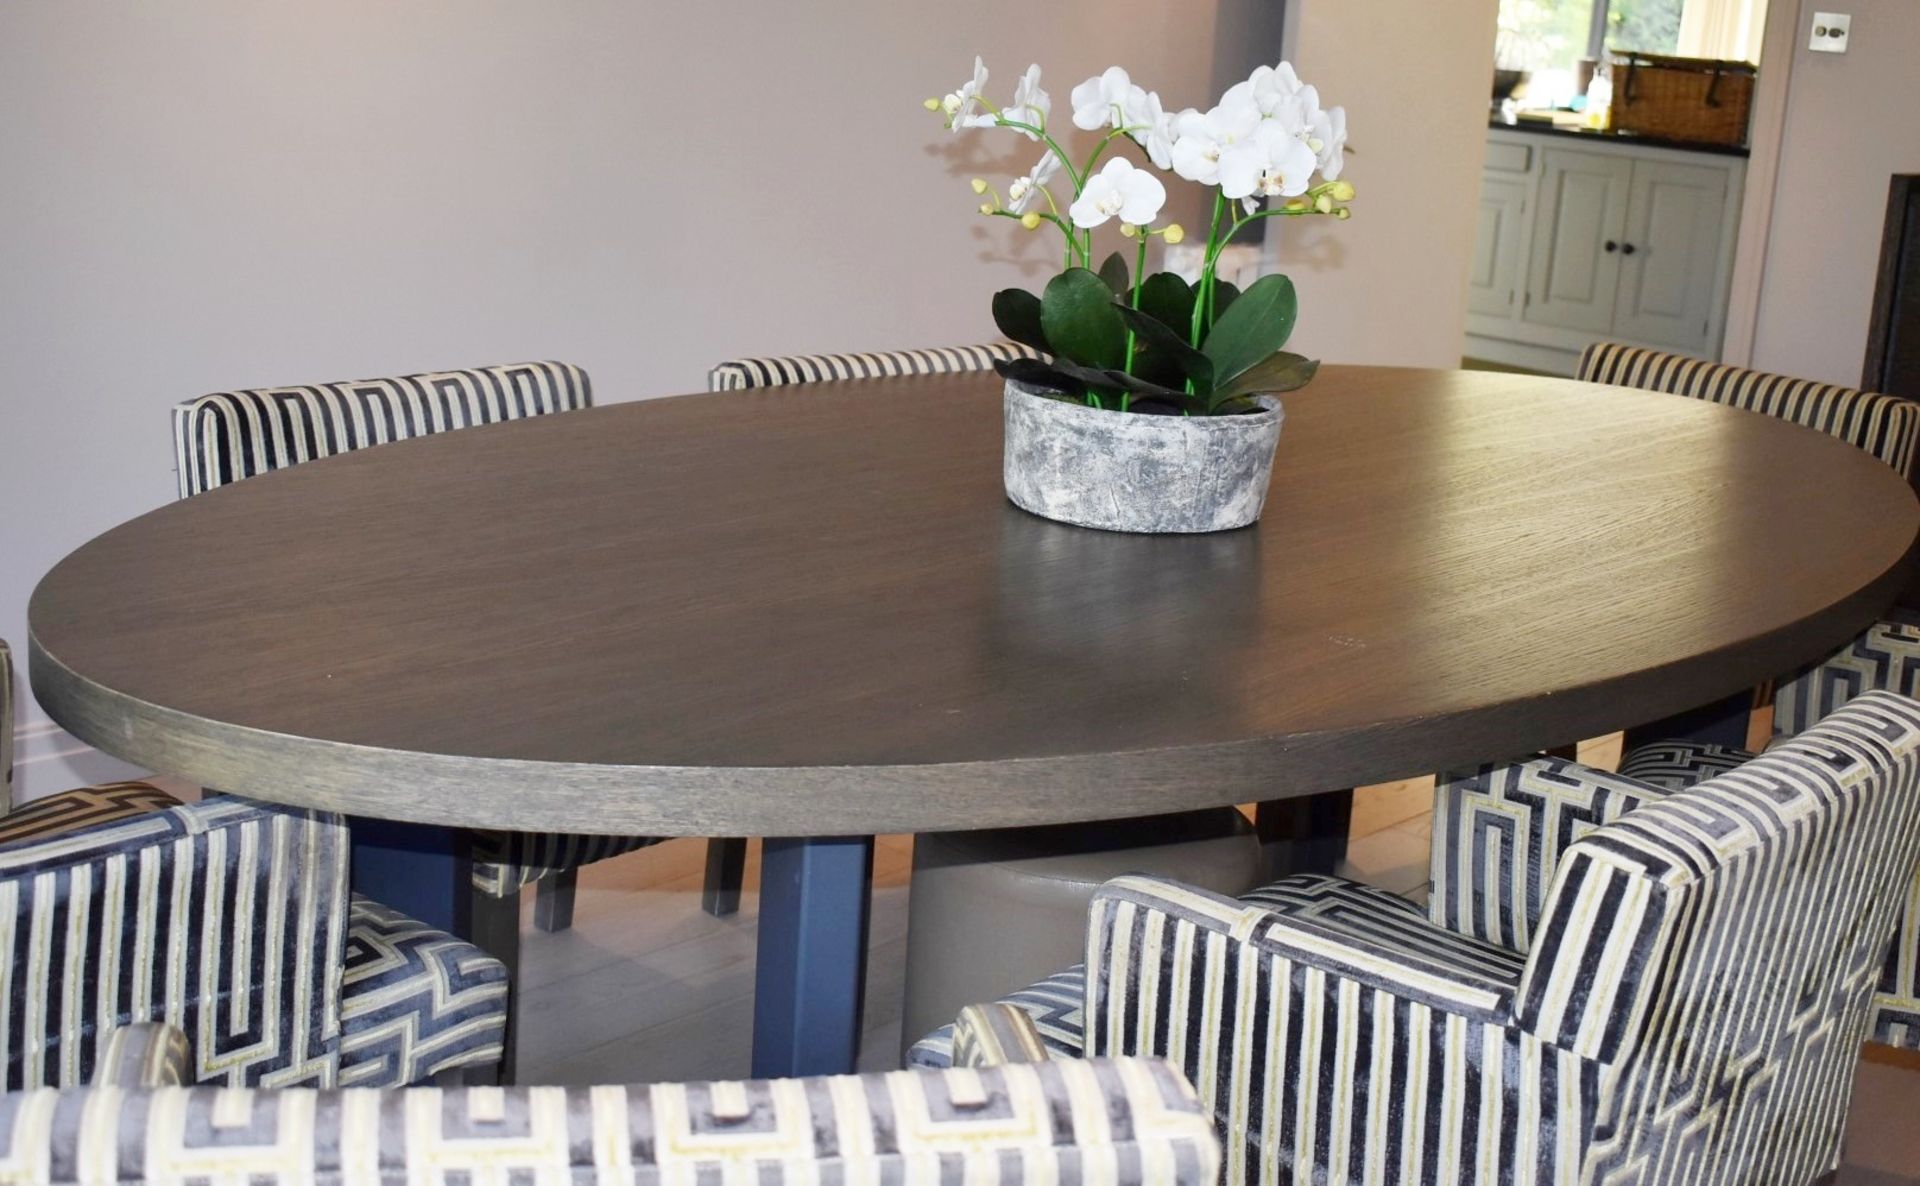 1 x Oval Dining Table With A Limed Oak Finish And Metal Legs - Image 5 of 5